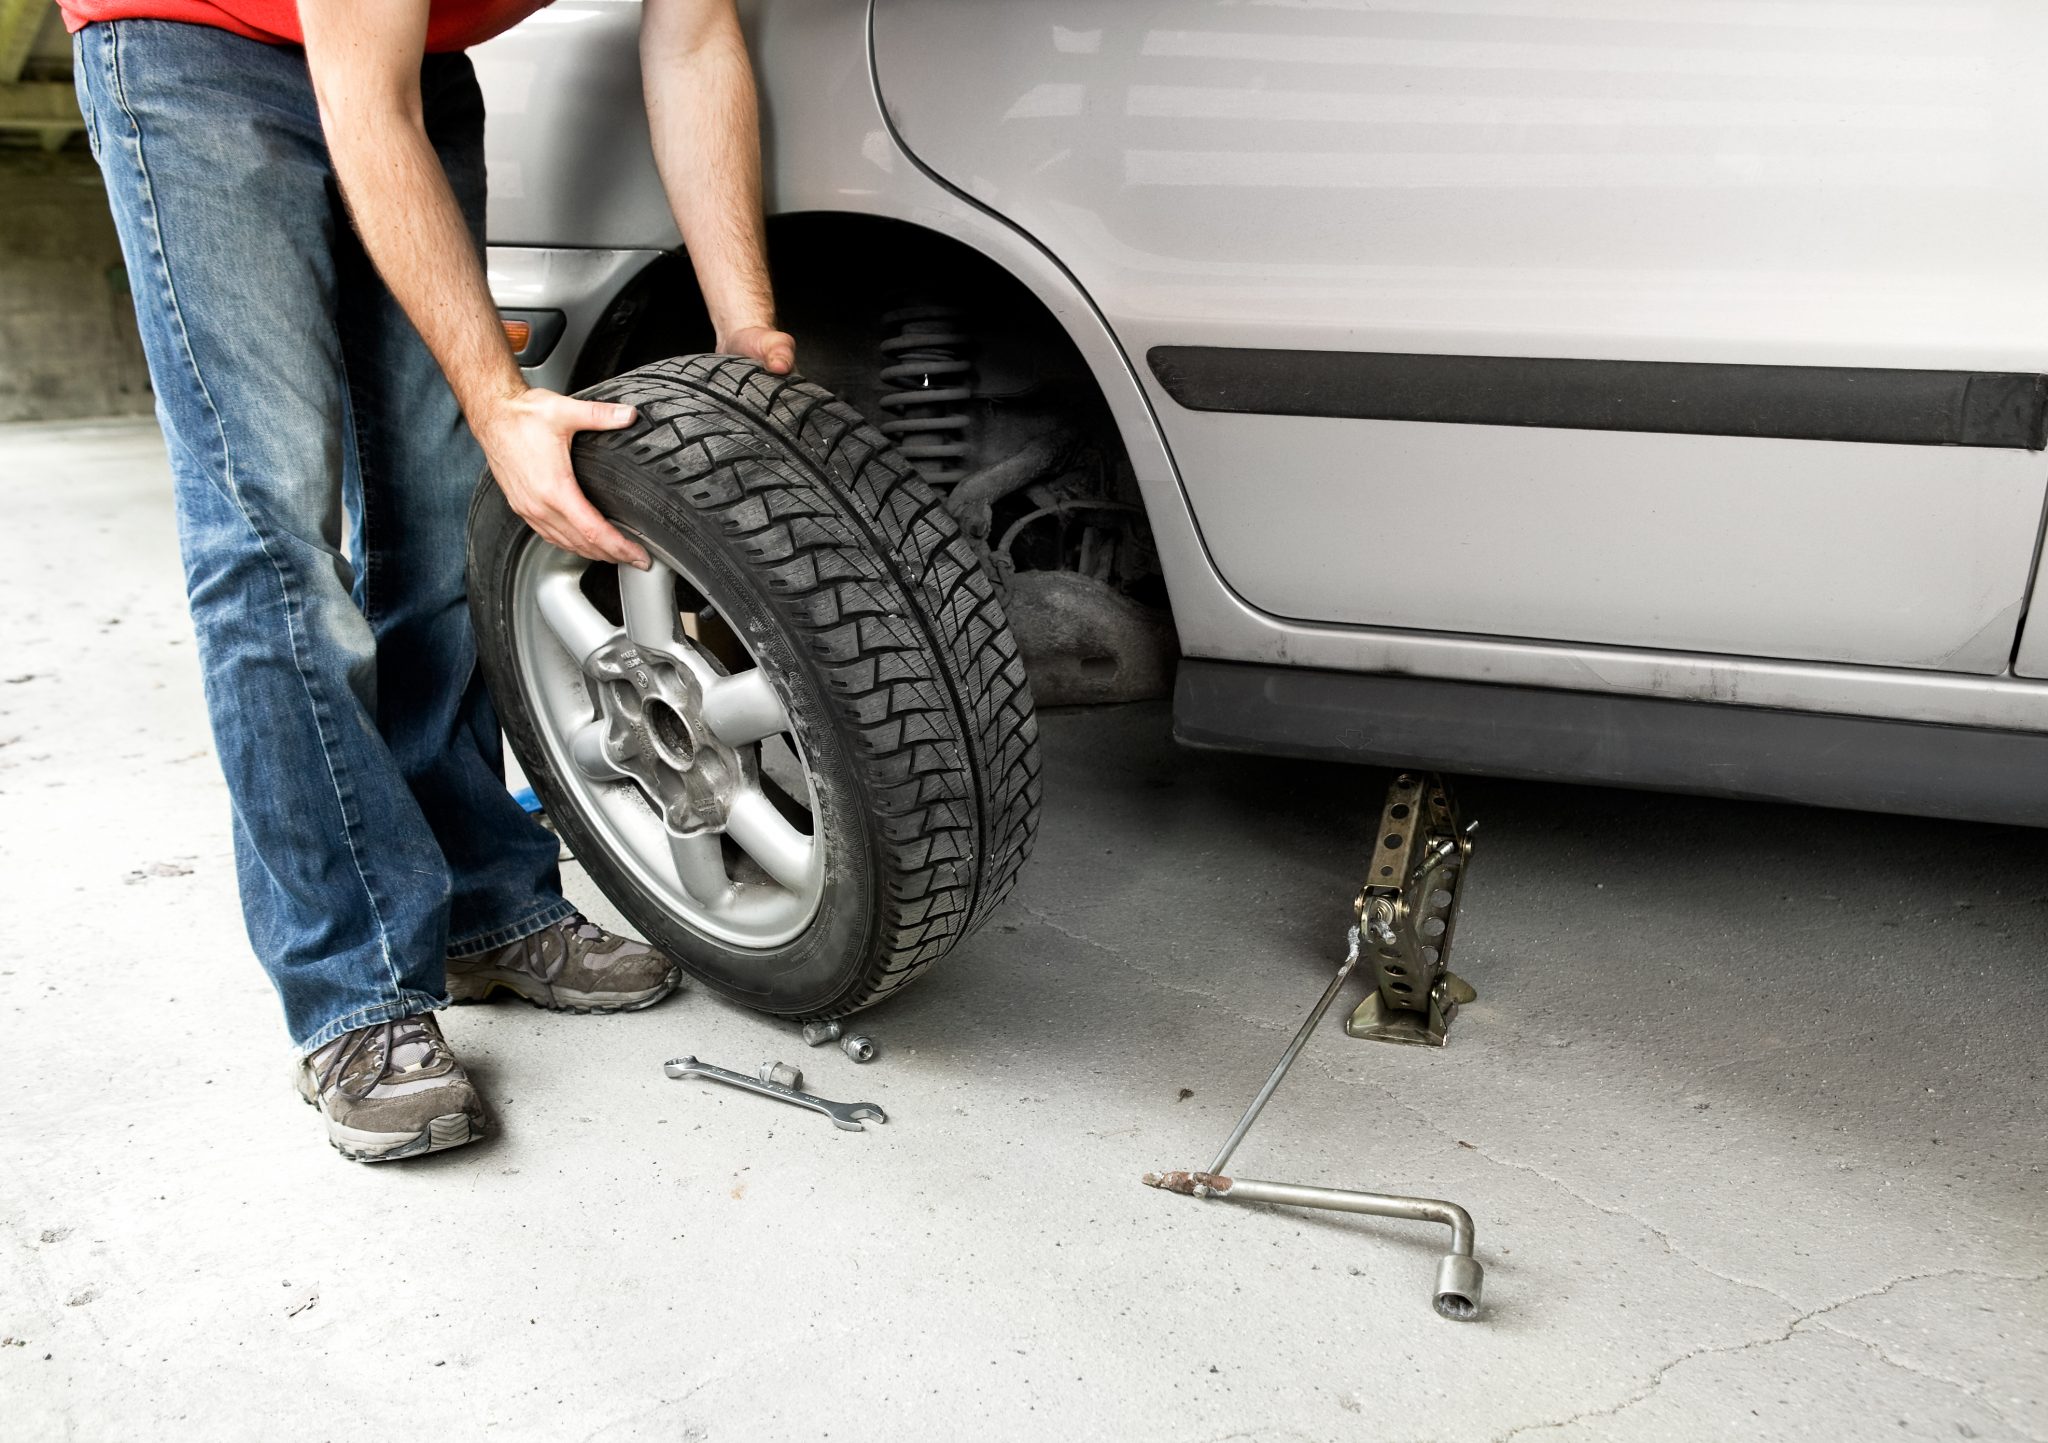 To Repair or Replace Your Tires? That is the Question